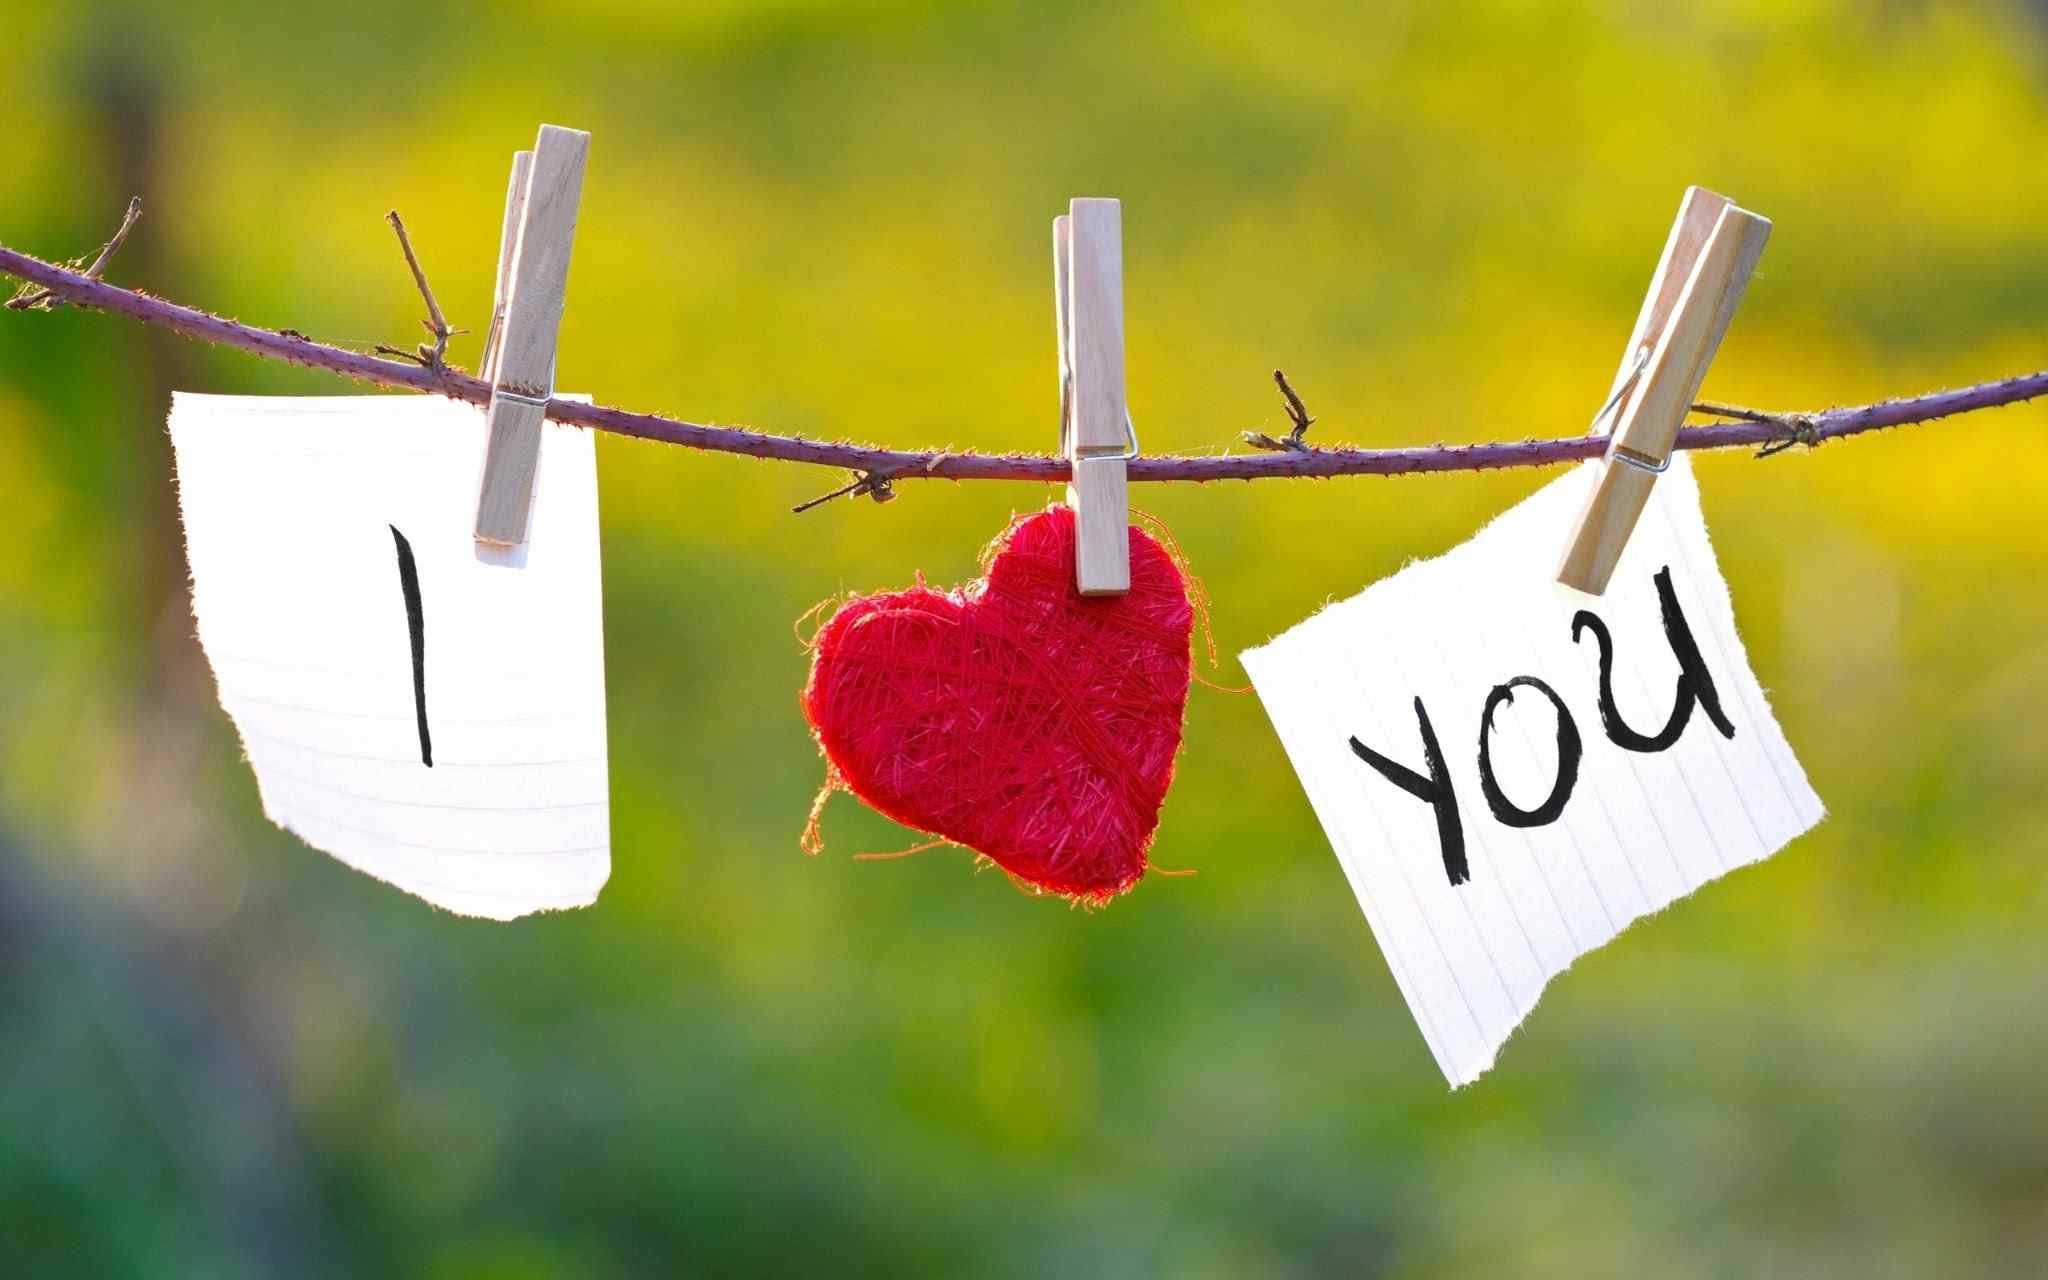 I LOVE YOU HD Wallpapers | HD Wallpapers | ID #5405